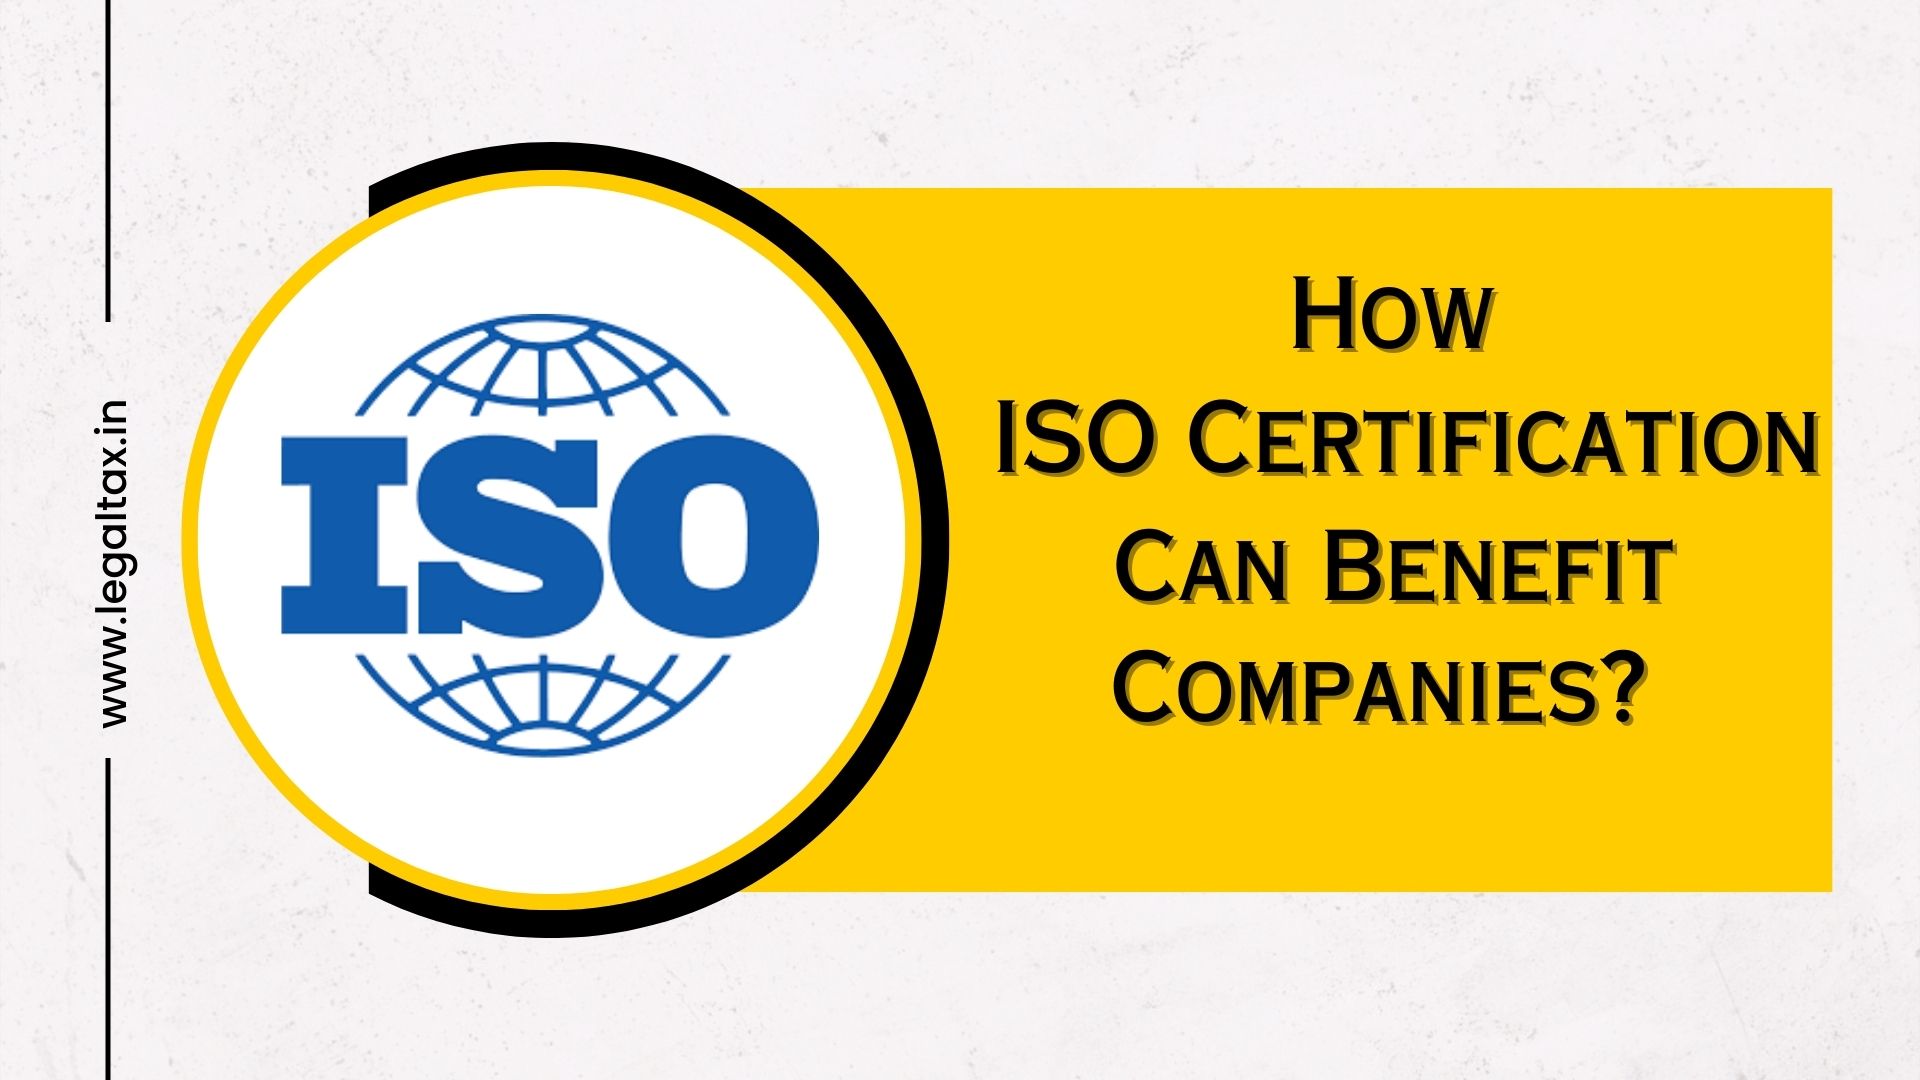 How ISO Certification Can Benefit Companies